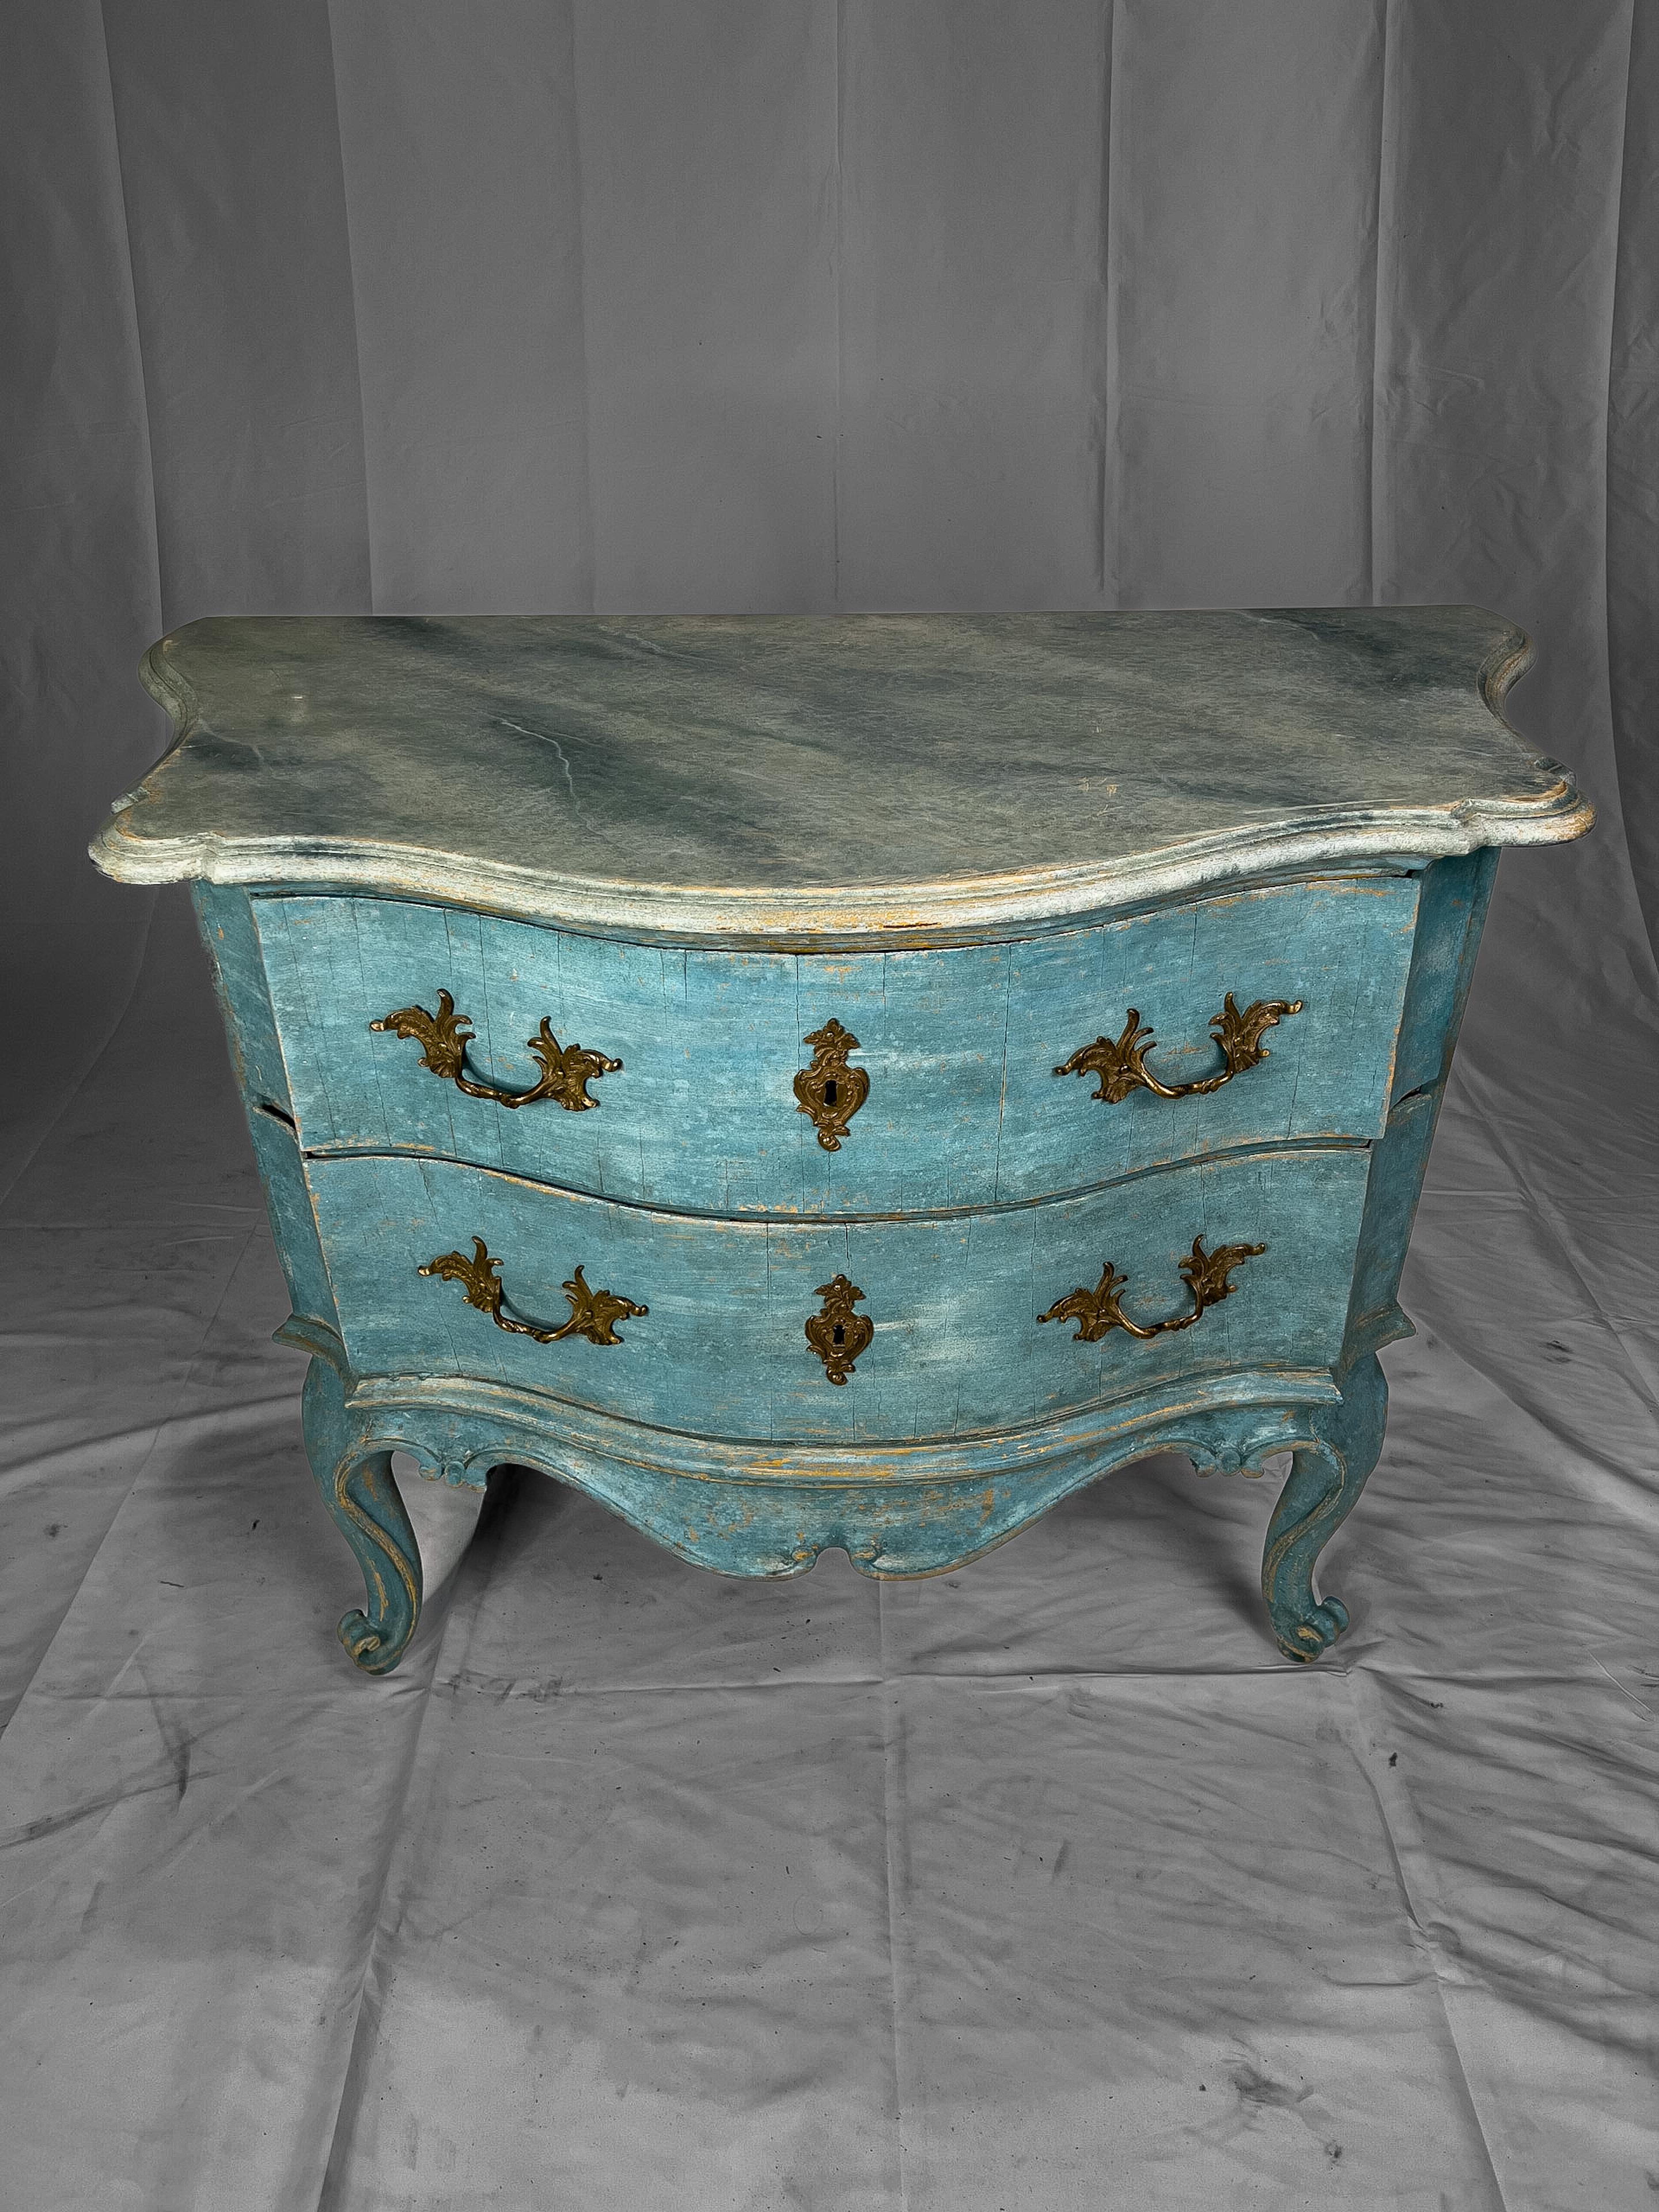 18th c. Swedish Commode with a serpentine shape, cabriole legs and a decorative painted finish. The top surface is painted to resemble marble. The drawers have Rococo style hardware.